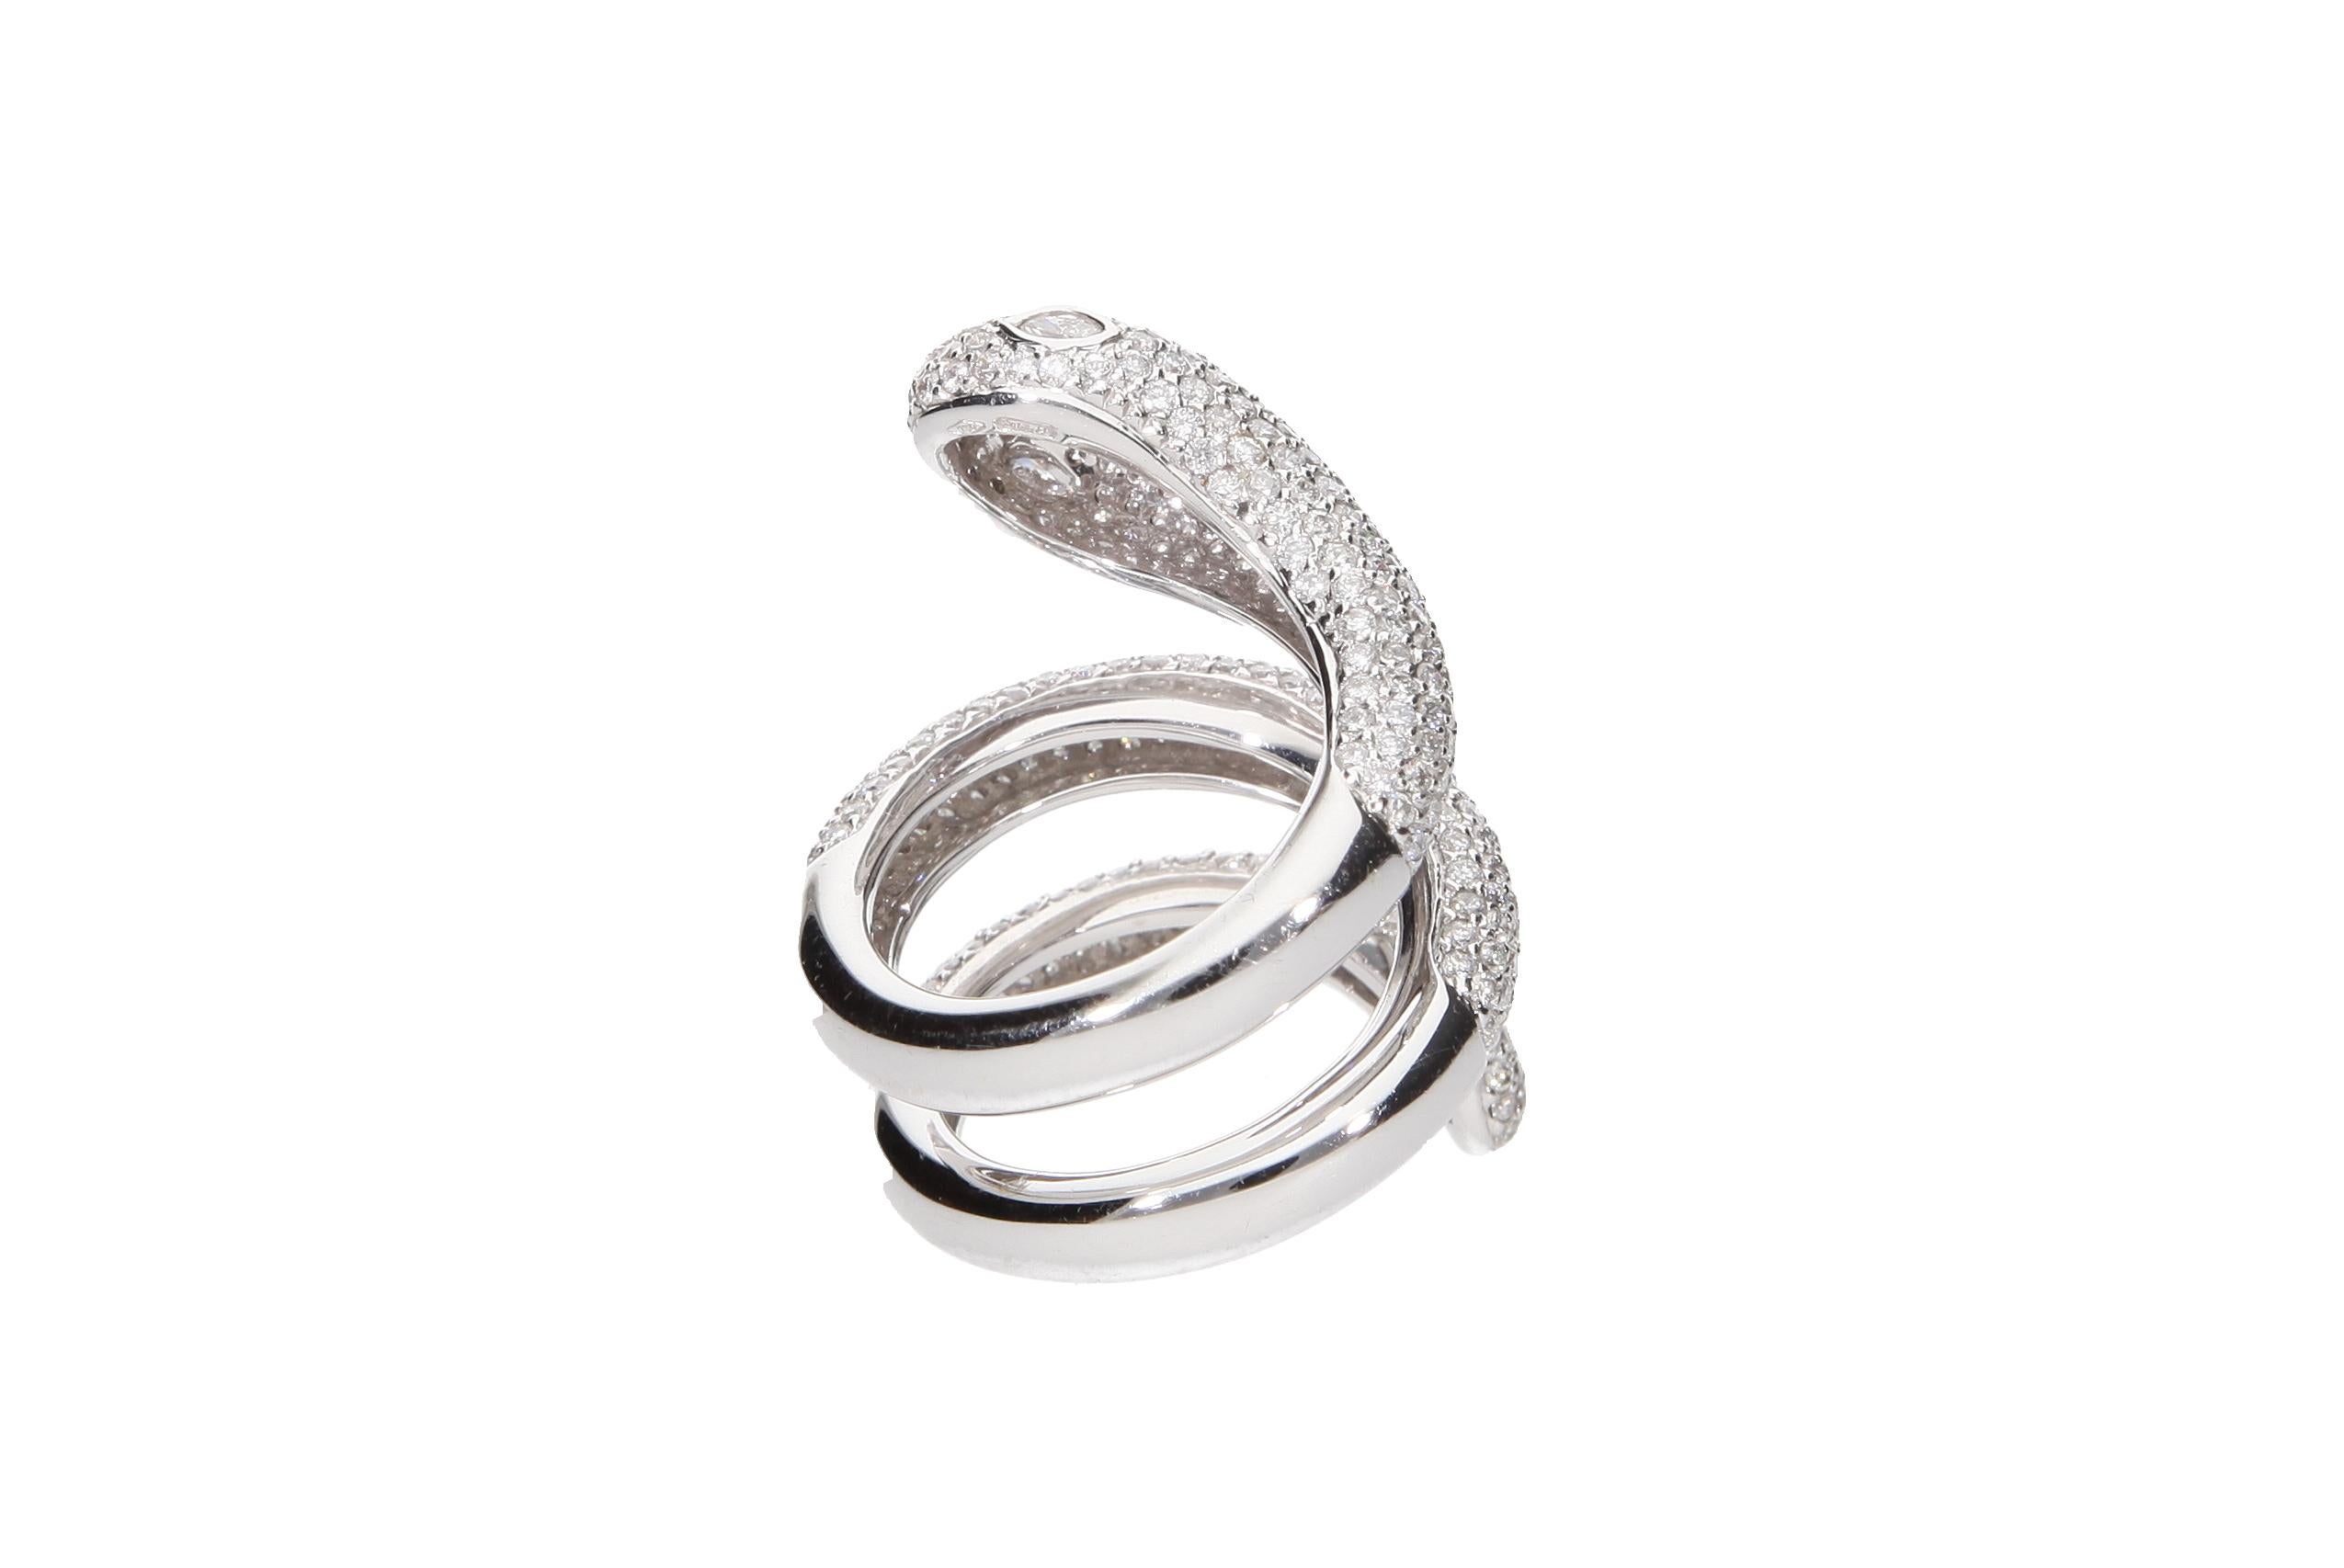 Modern Diamonds ct 4.02. Snake Ring. 18 Kt White Gold. Made in Italy For Sale